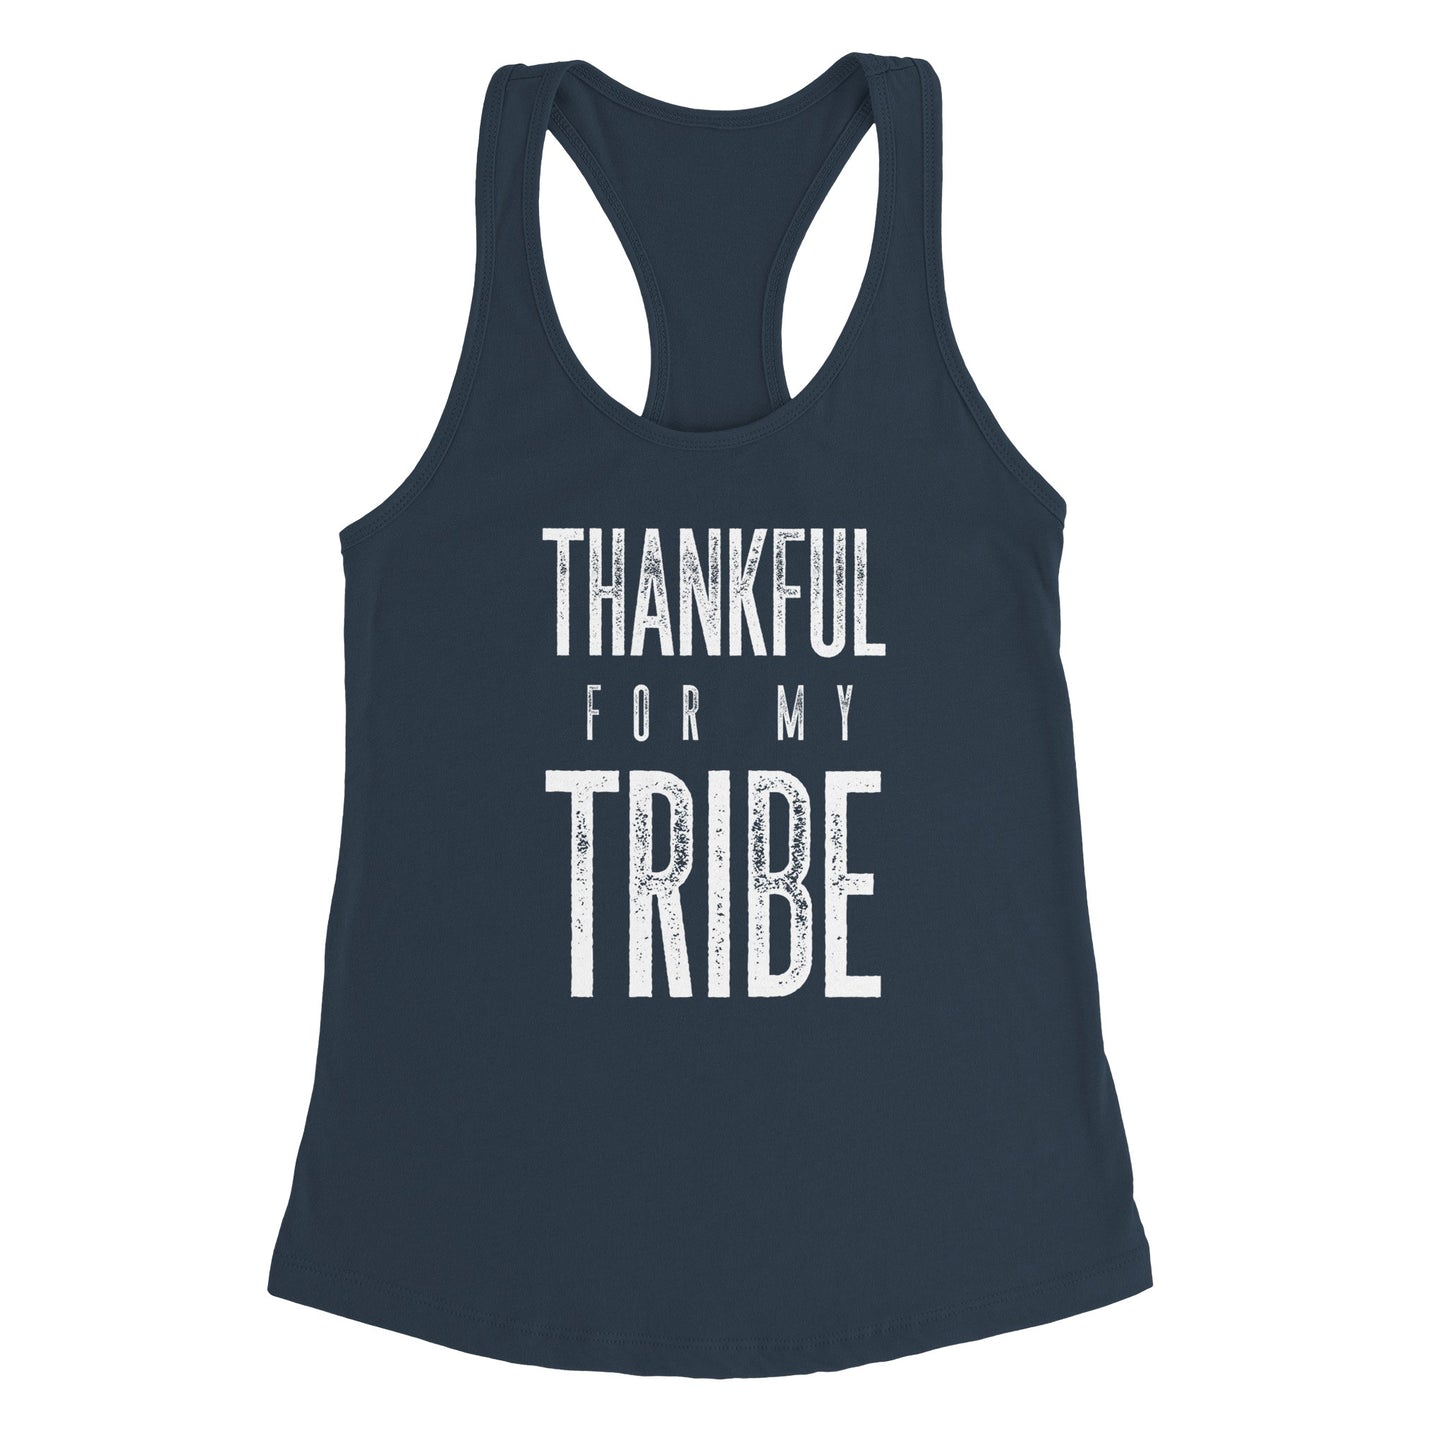 Thankful for My Tribe Racerback Tank